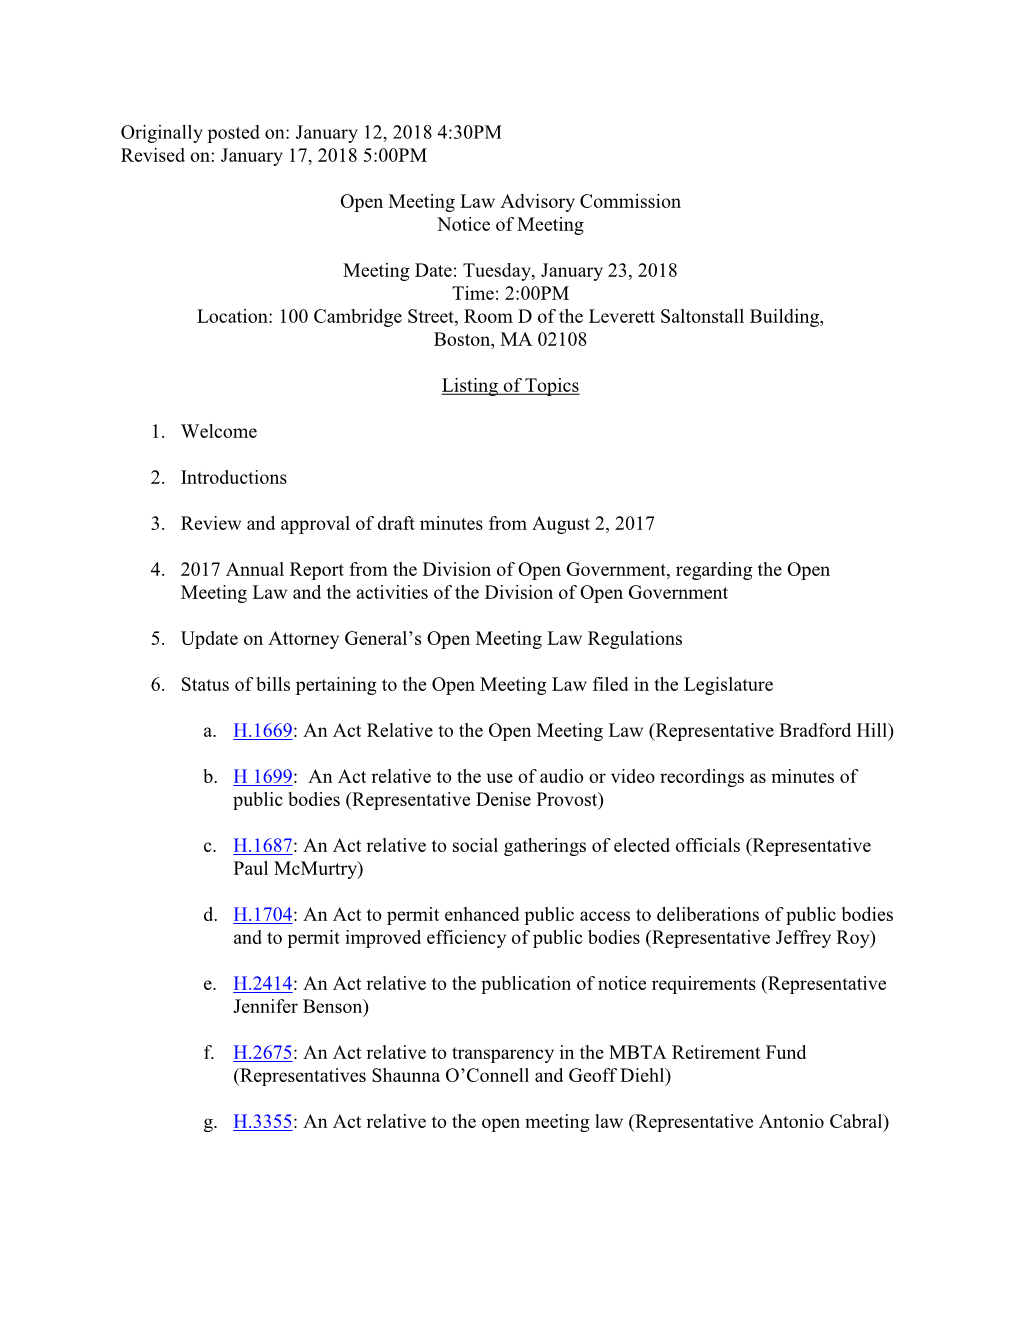 January 17, 2018 5:00PM Open Meeting Law Advisory Commission Notice Of